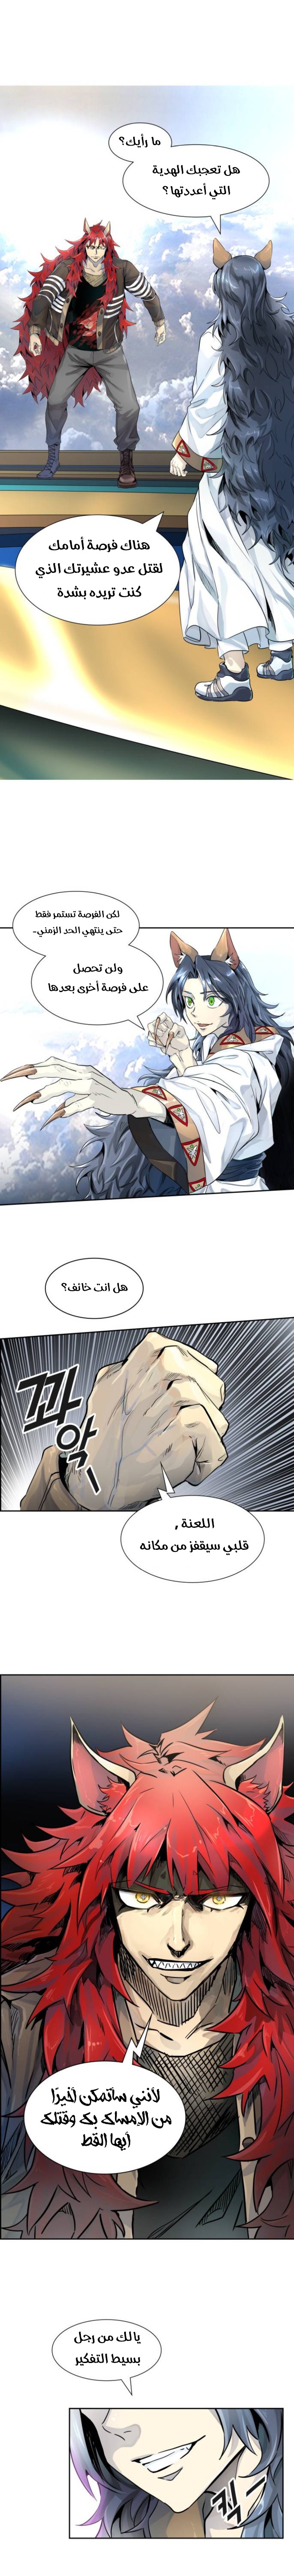 Tower of God S3: Chapter 75 - Page 1